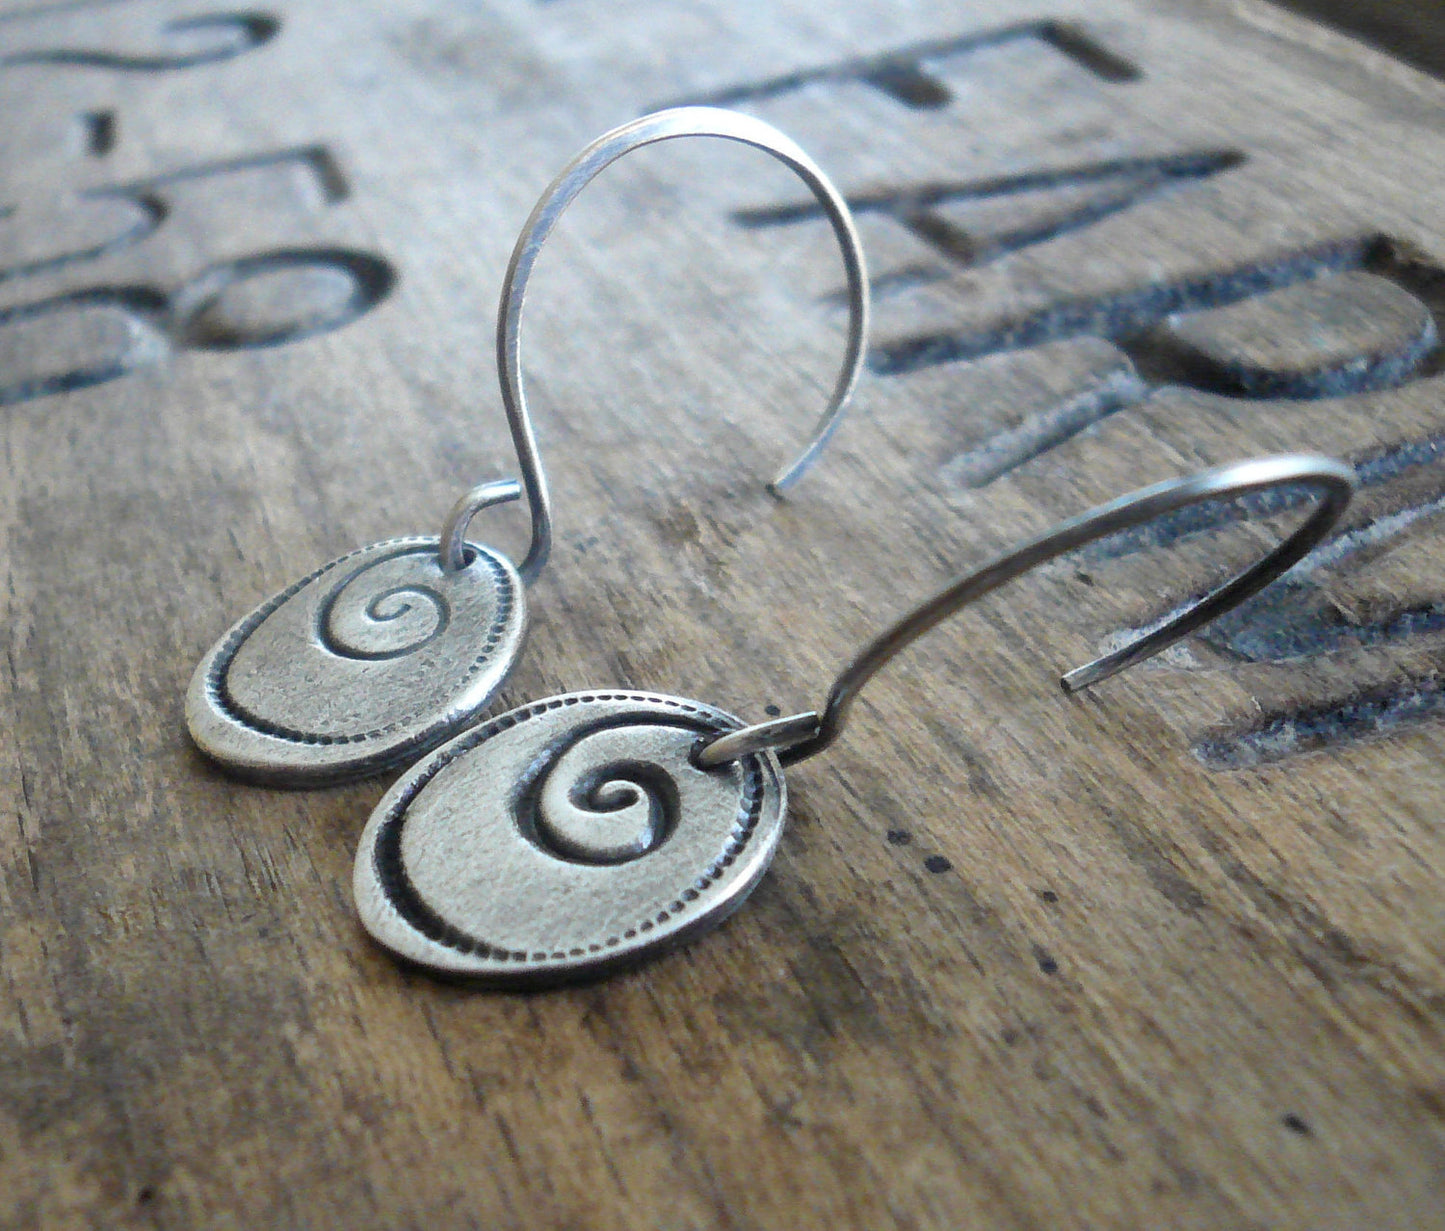 Helix Earrings - Handmade. Oxidized fine and sterling silver